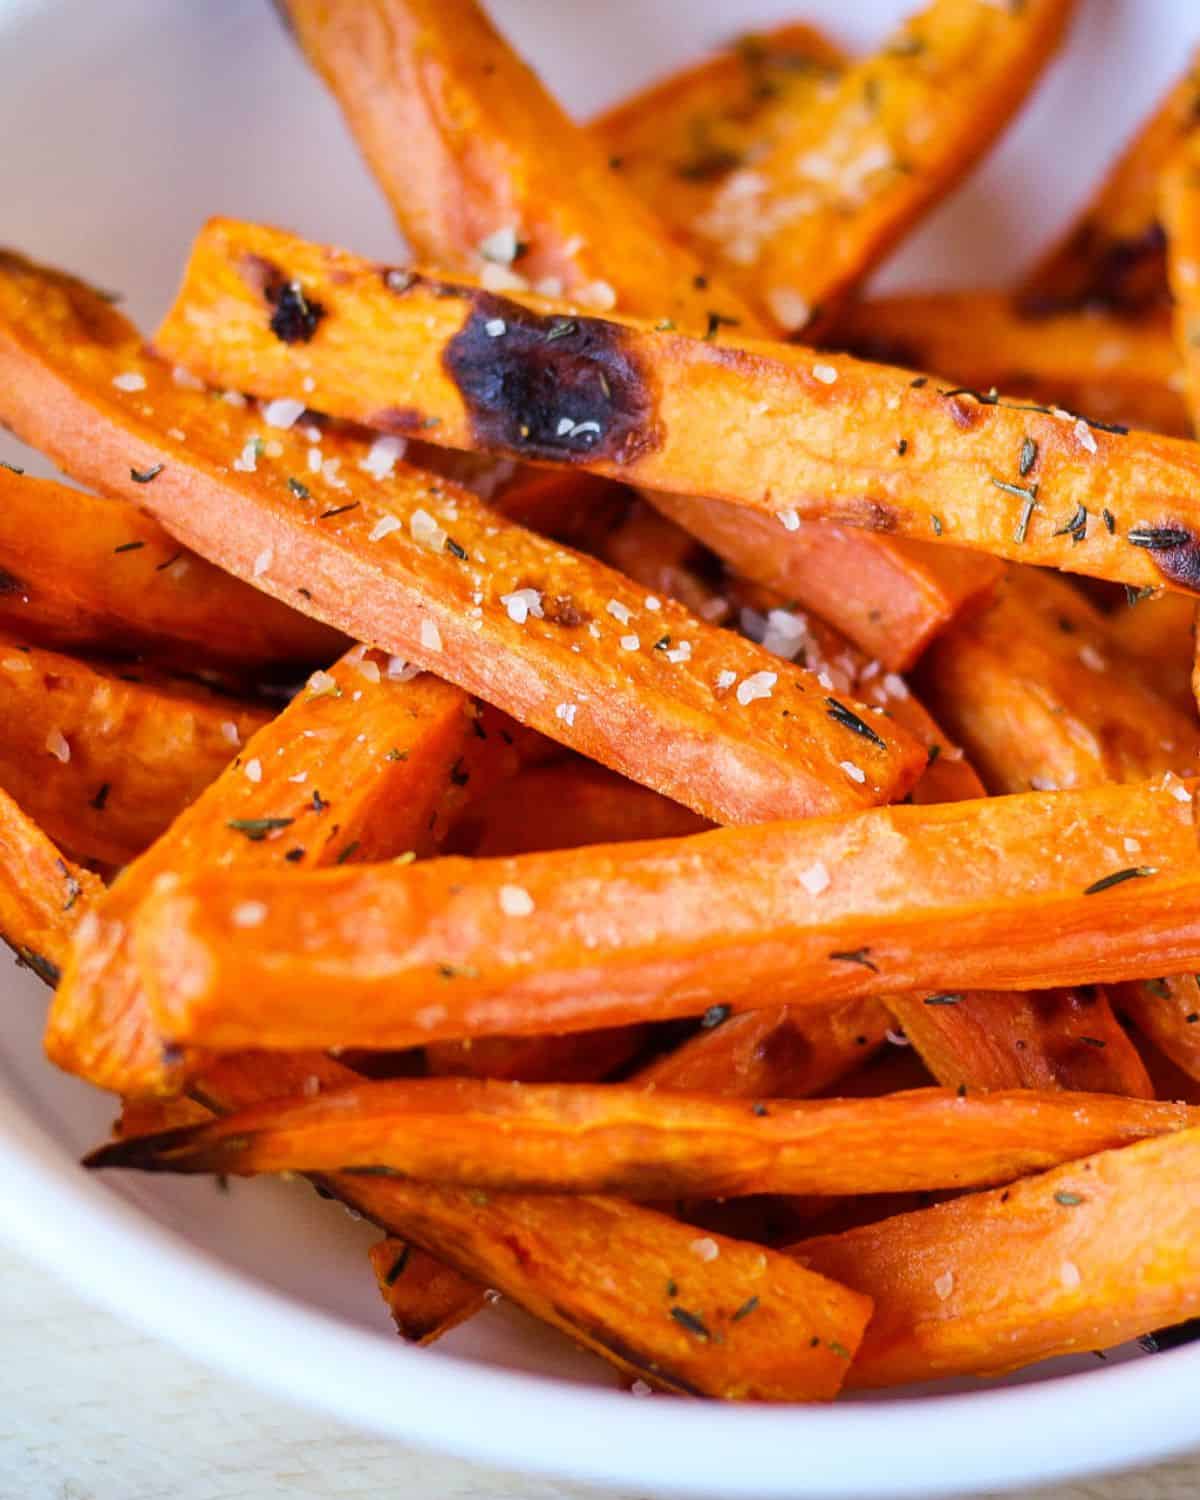 Close-up view of cooked sweet potatoes sprinkled with grated parmesan and salt.